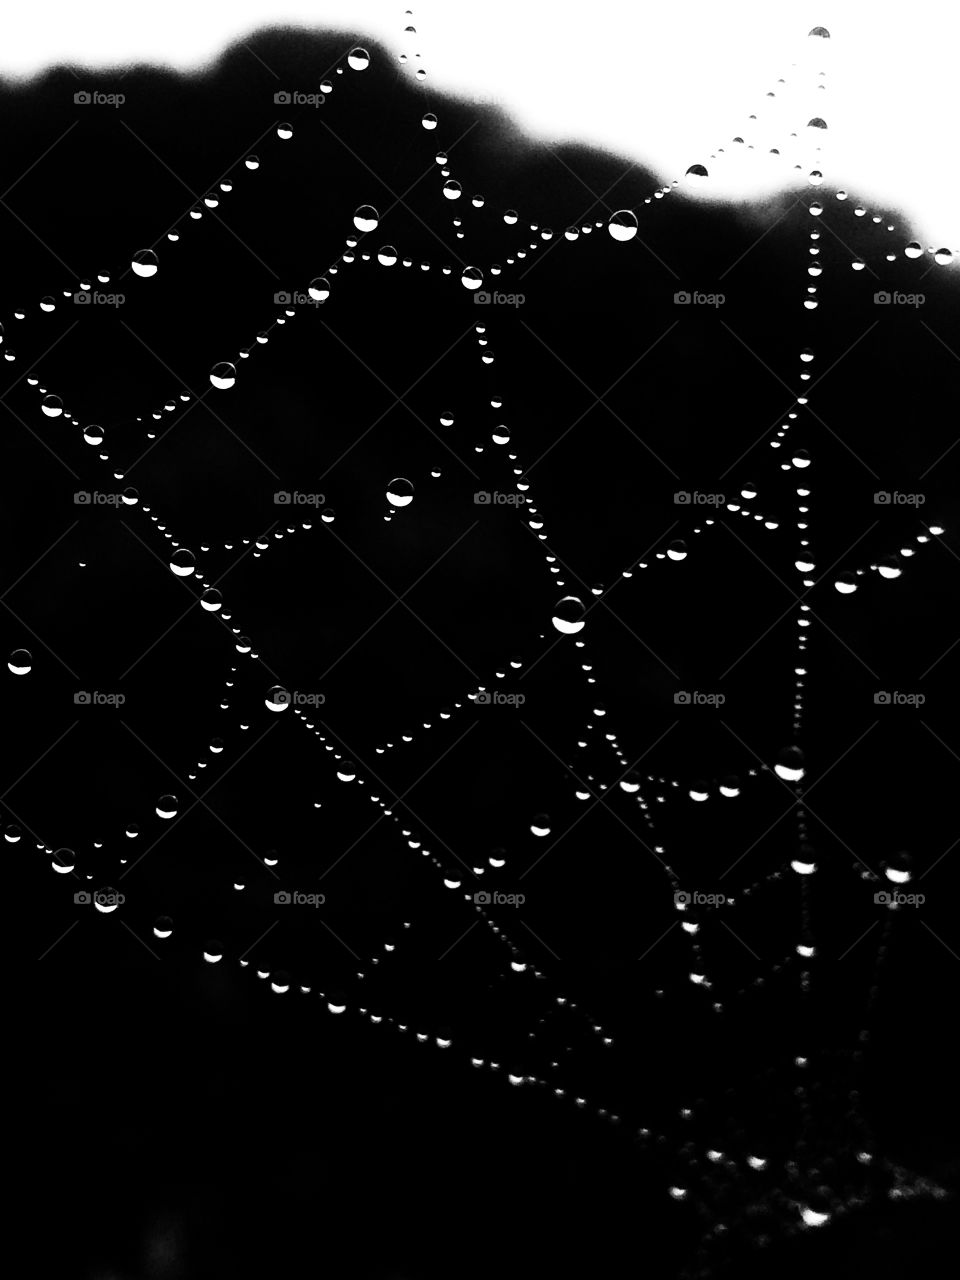 Morning dew and spiderweb